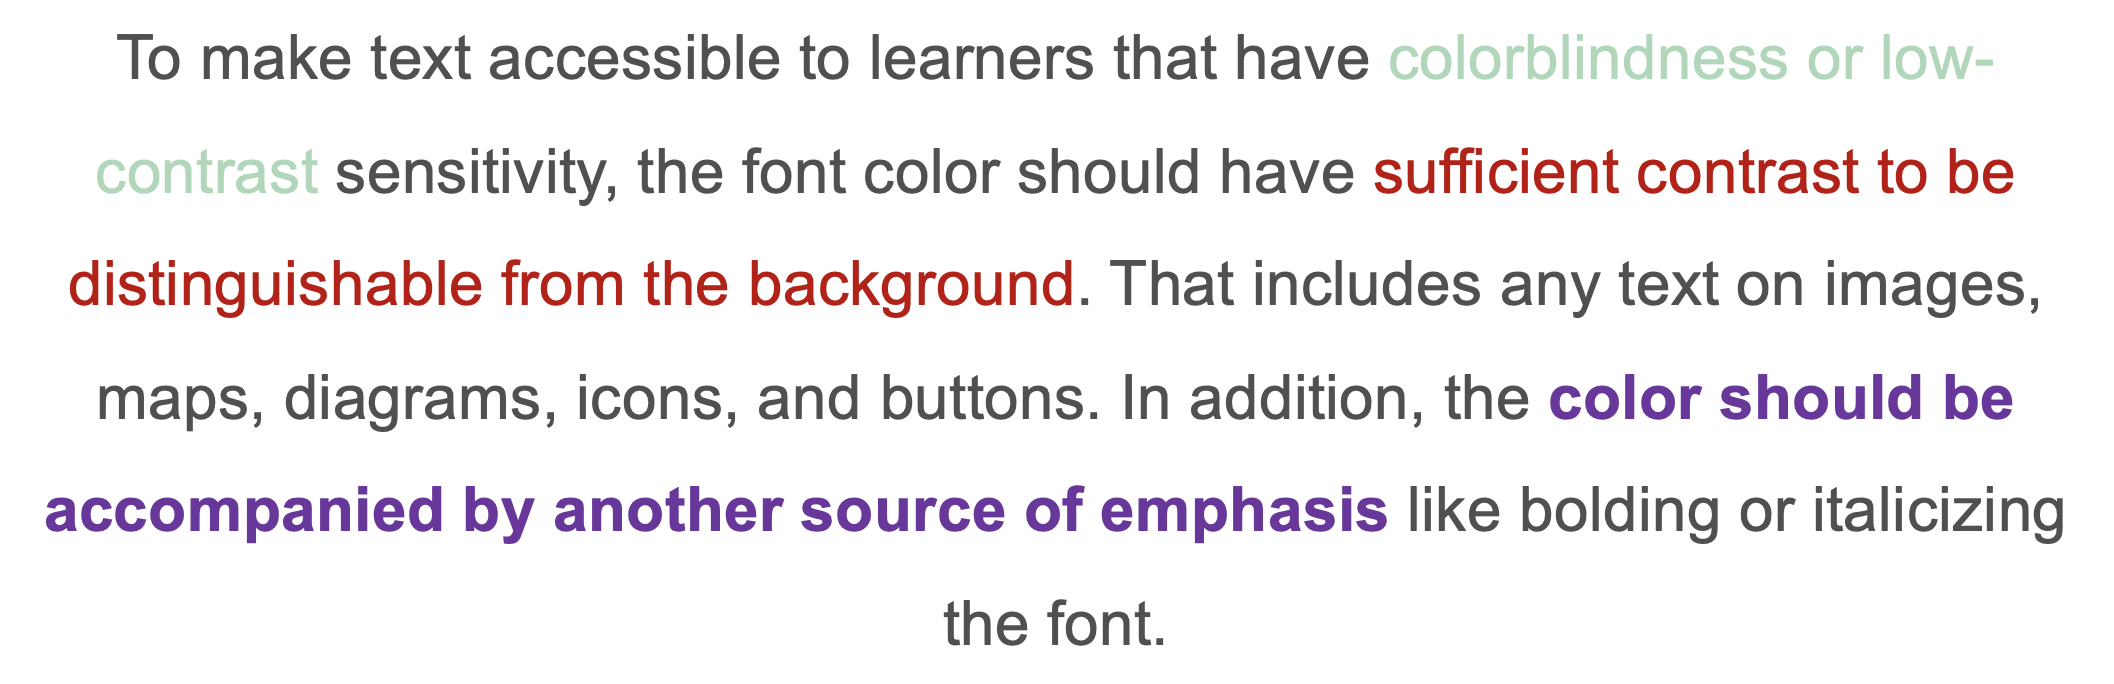 To make text accessible to learners that have colorblindness or low-contrast sensitivity, the font color should have sufficient contrast to be distinguishable from the background. That includes any text on images, maps, diagrams, icons, and buttons. In addition, the color should be accompanied by another source of emphasis like bolding or italicizing the font. 